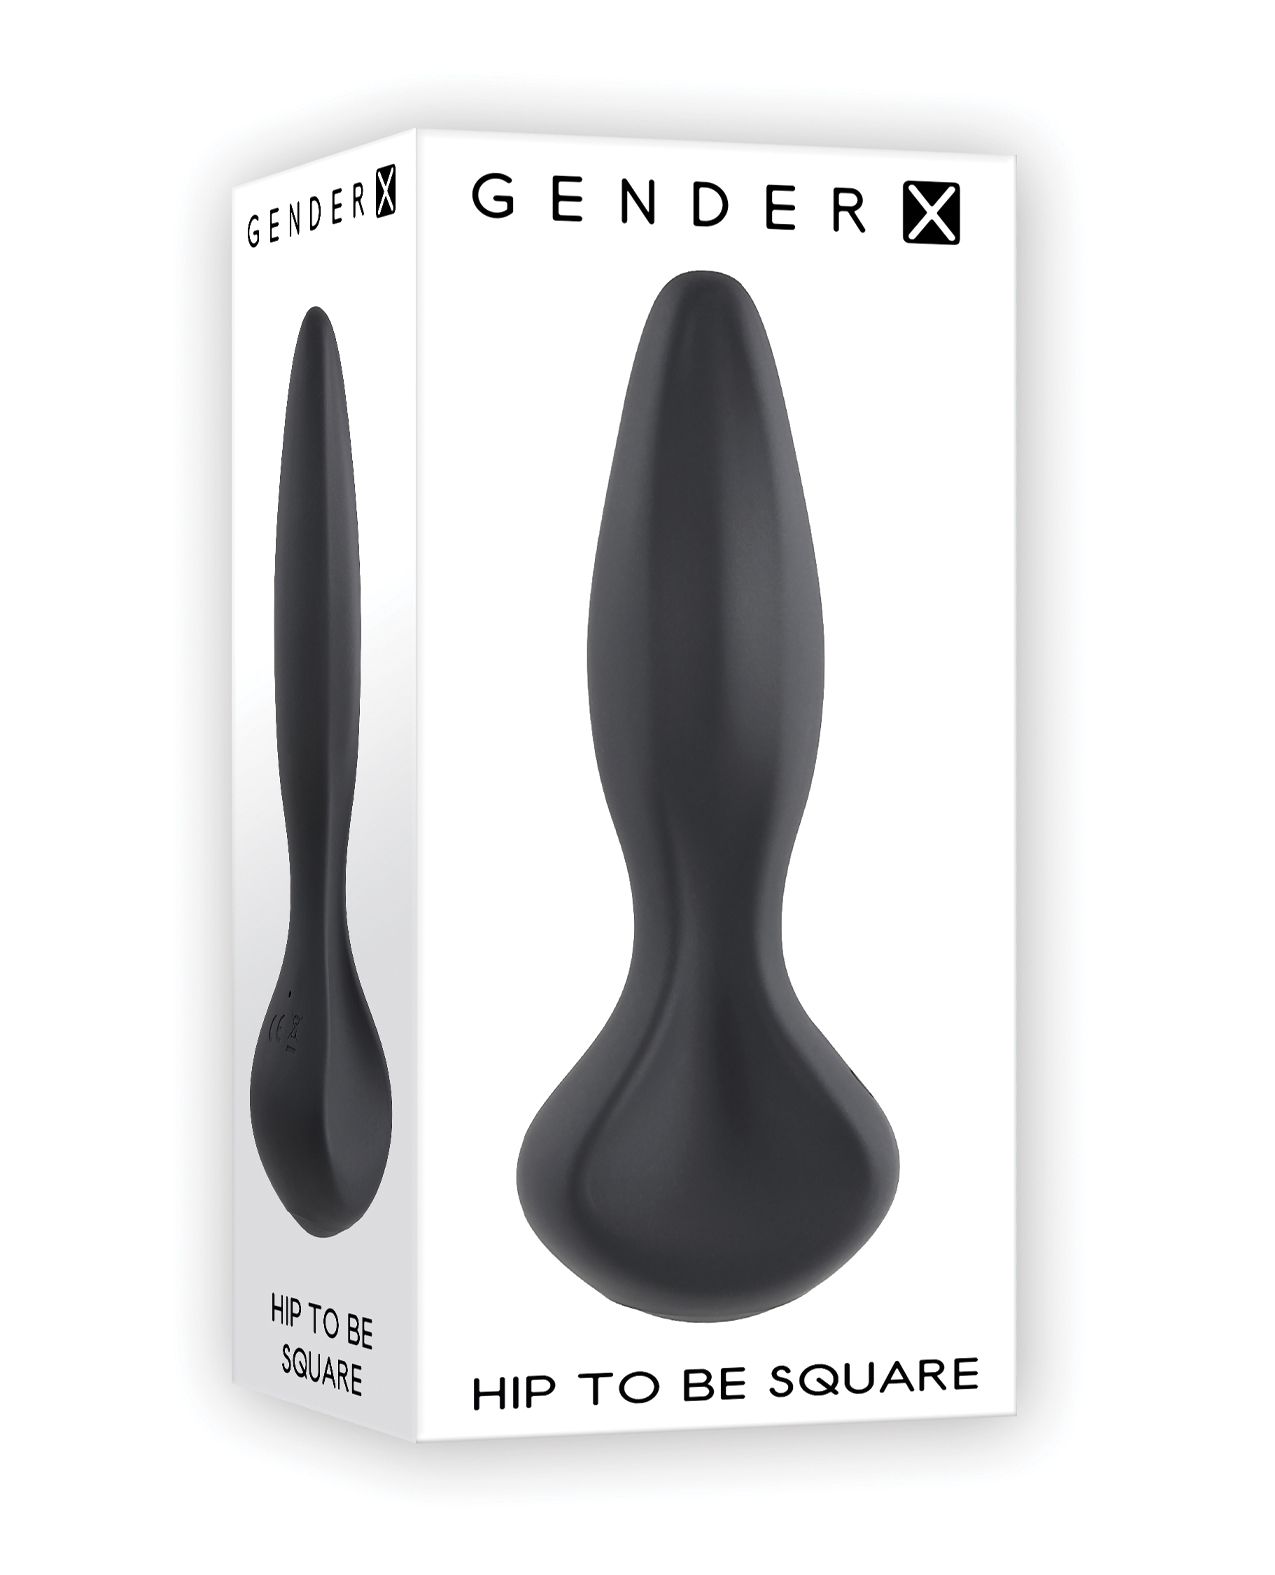 Hip to be square is a black toy on a white box